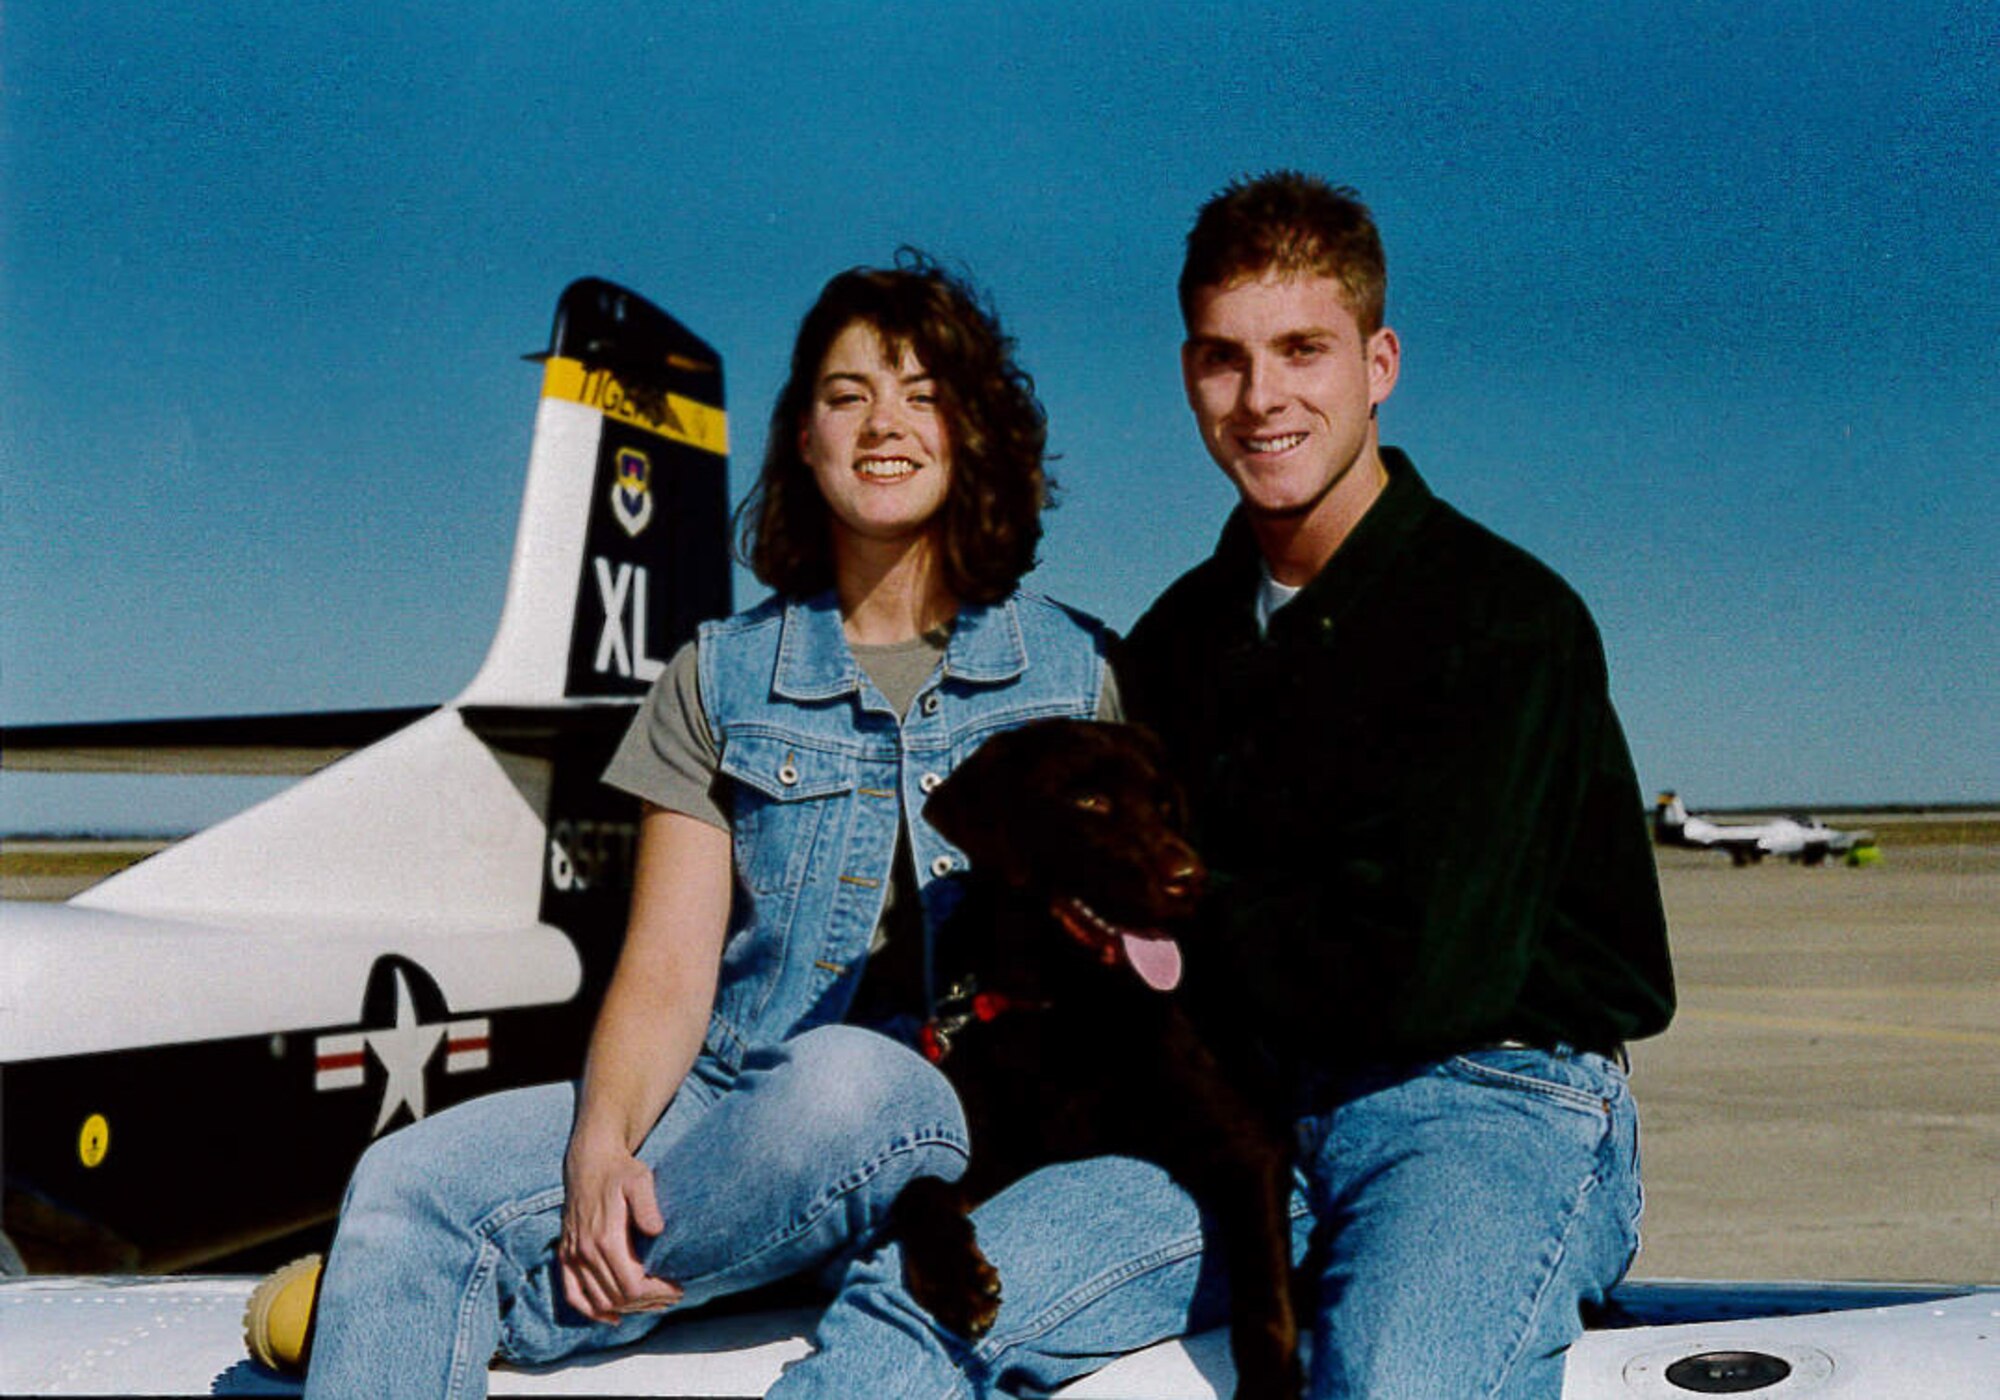 Maj. (Dr.) Jeffrey Woolford and his wife Nicole pose for a photo with their dog on top of a test pilot aircraft. Woolford began his career in the Air Force as an enlisted crew chief. He is now one of 12 pilot-physicians and is currently attending Johns Hopkins University to earn his Master’s Degree in Public Health. (U.S. Air Force courtesy photo)